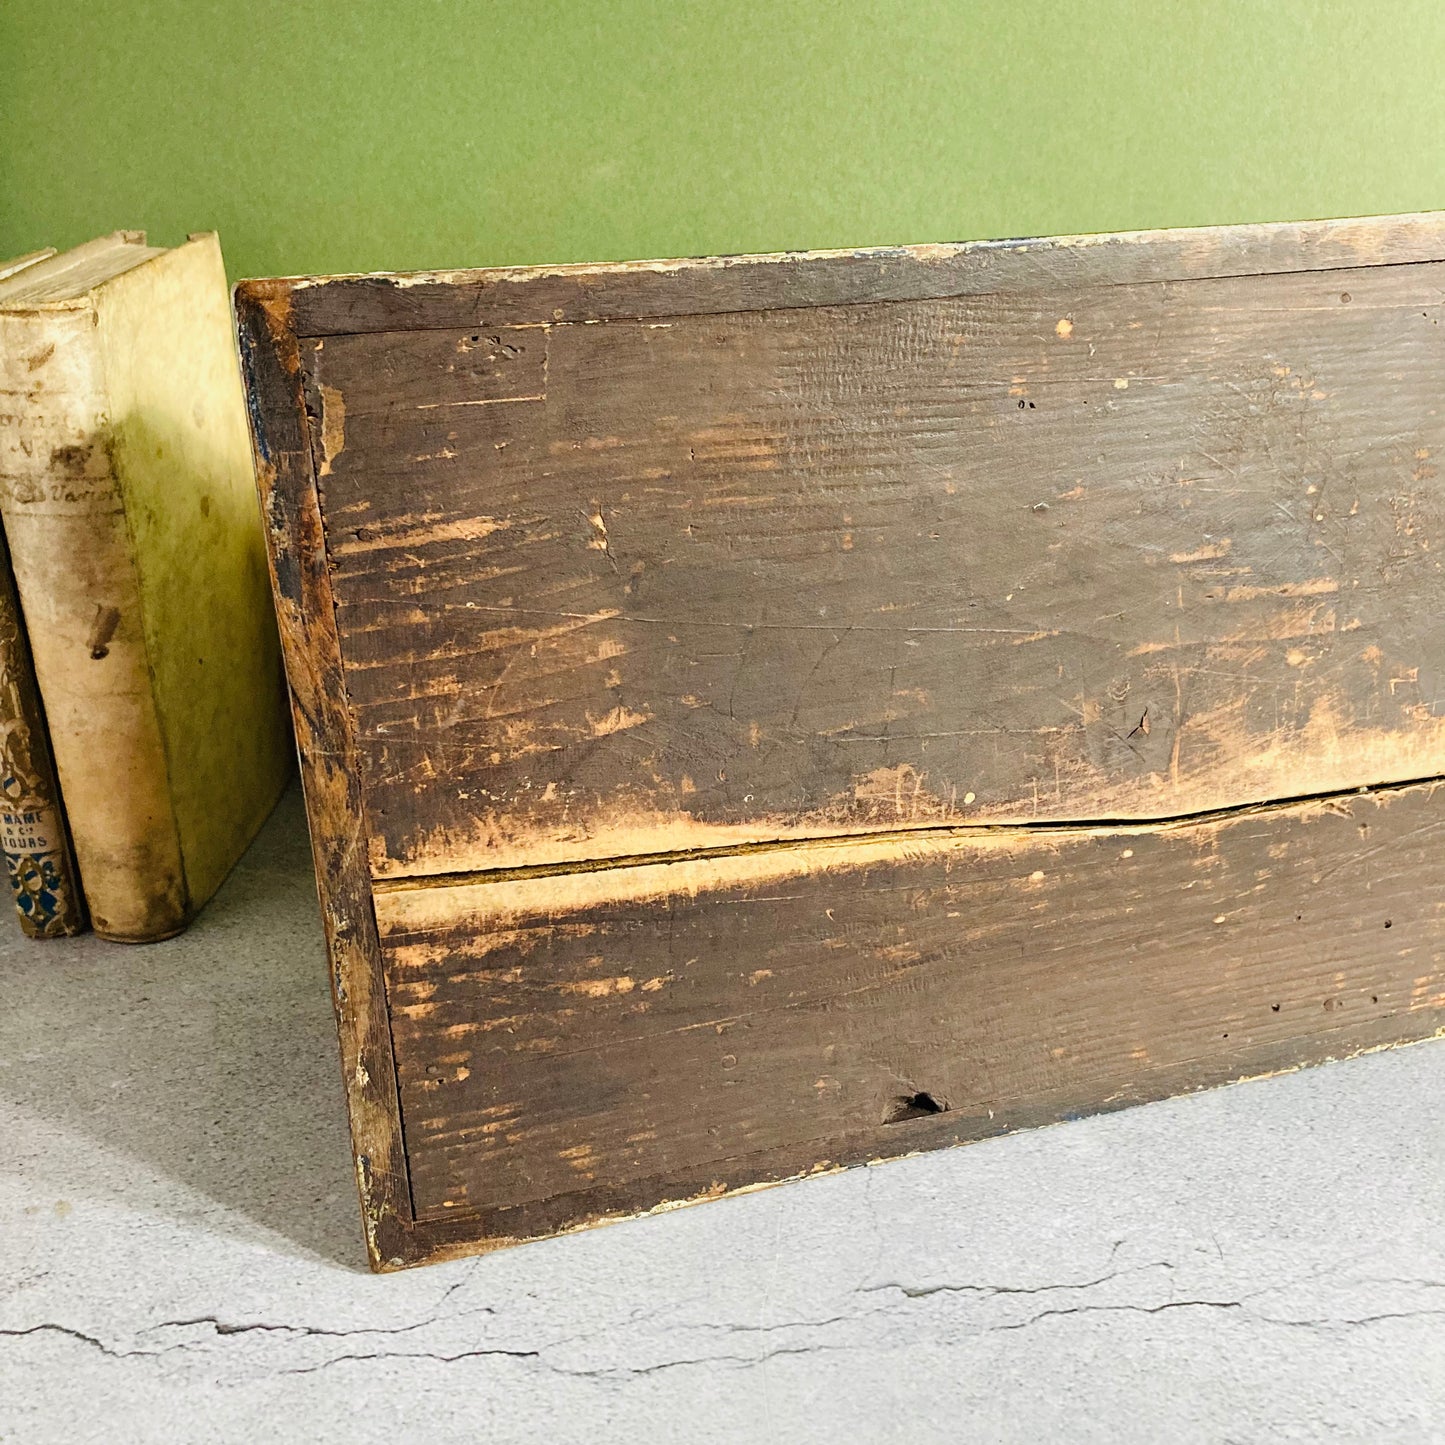 Antique Hand Painted French Wooden Casket Box